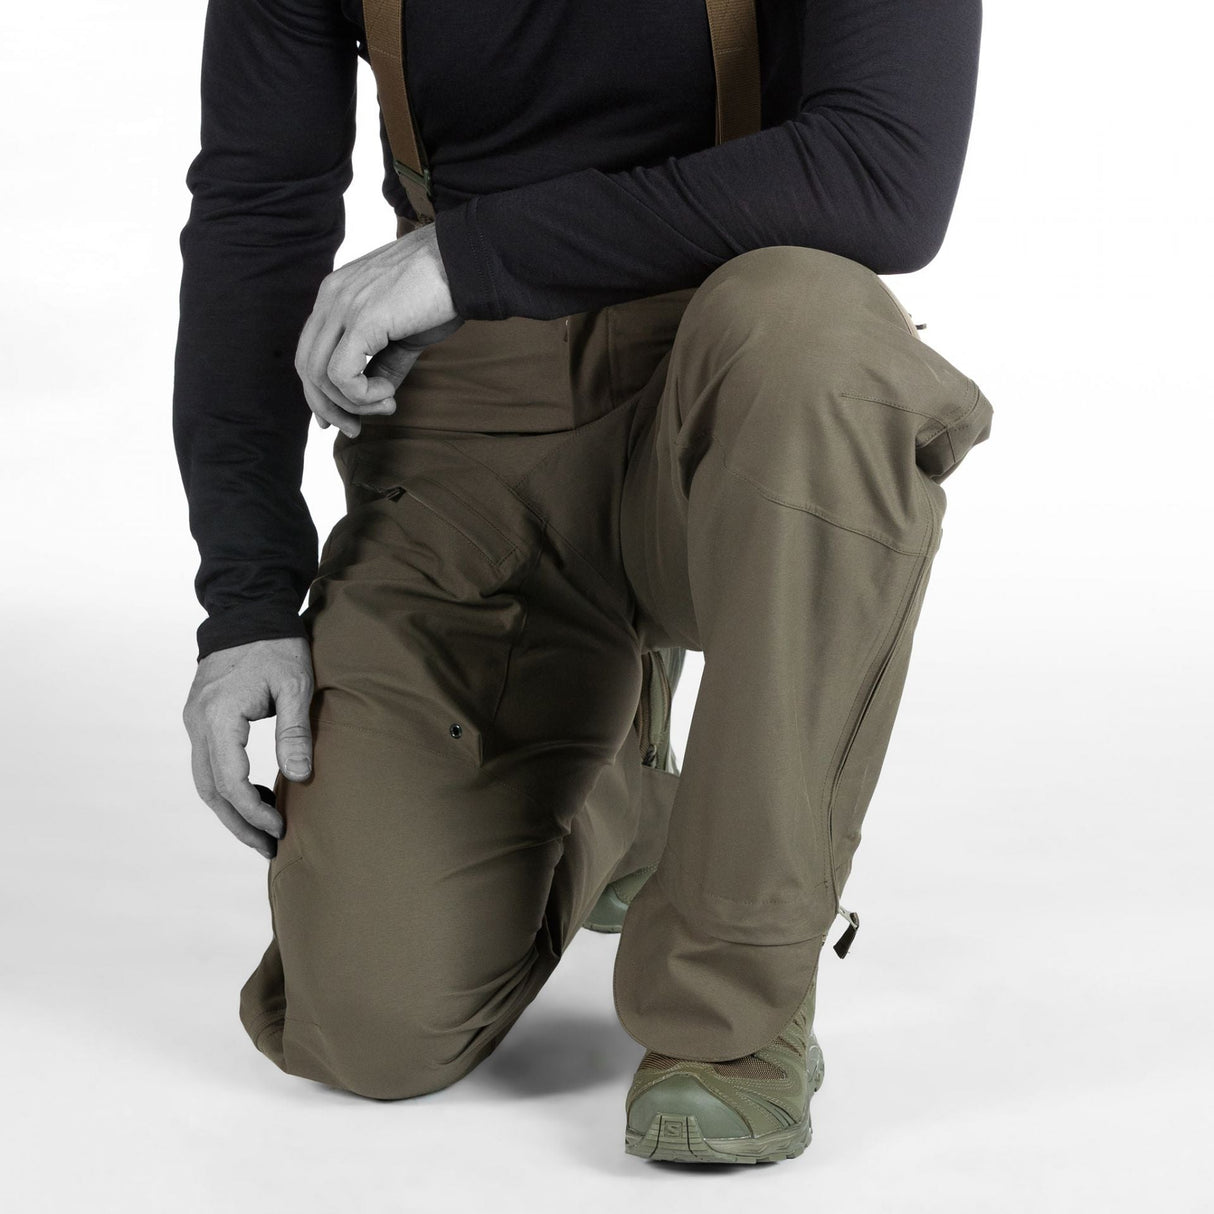 Tactical Waterproof Trousers: Black pants with extended back for enhanced coverage.